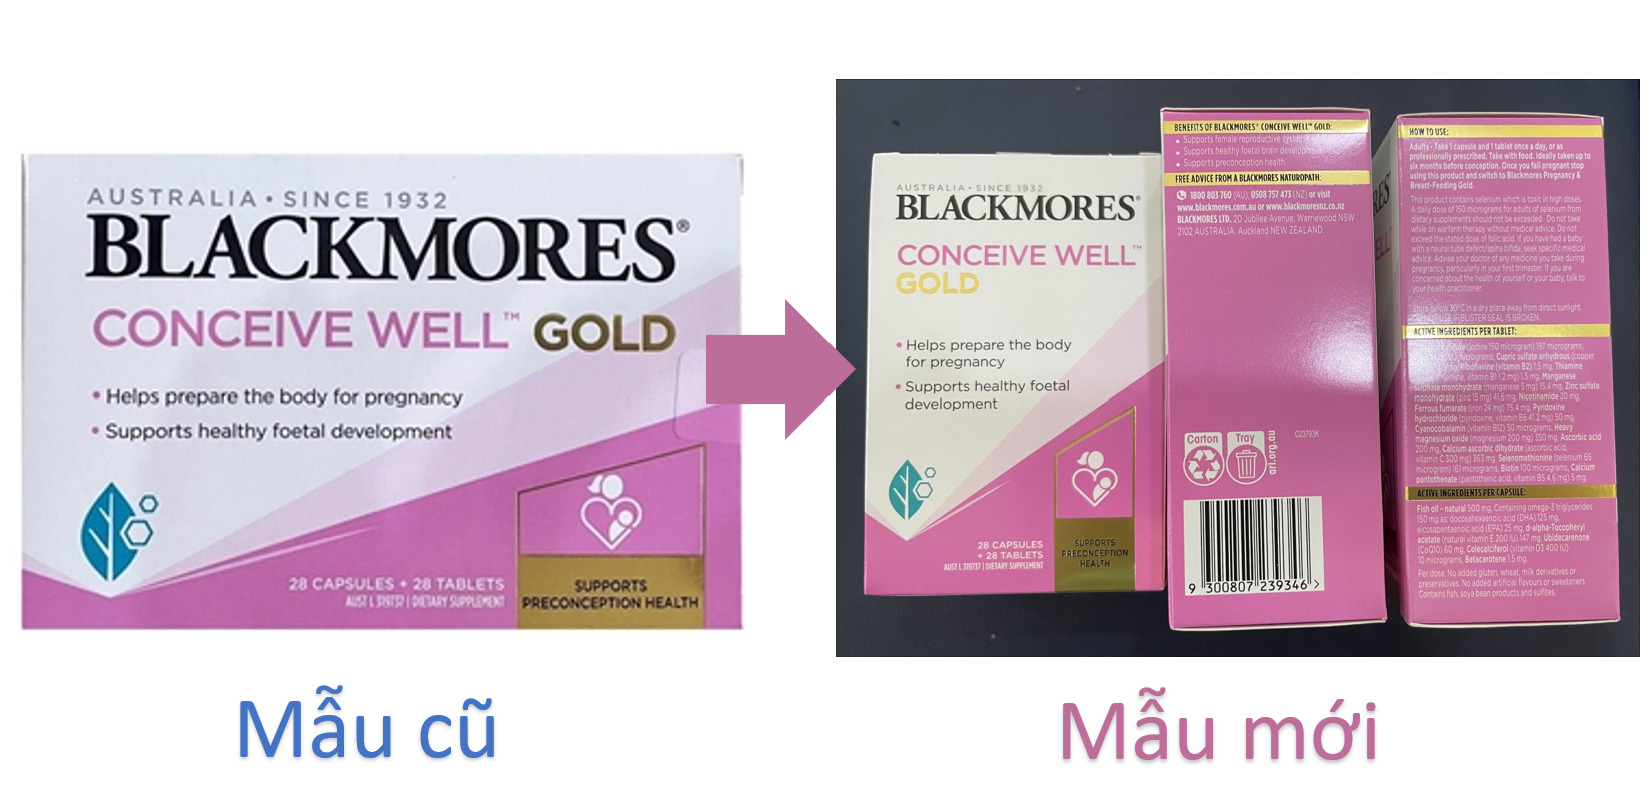 Blackmores Conceive Well Gold Preconception Mau cu moi